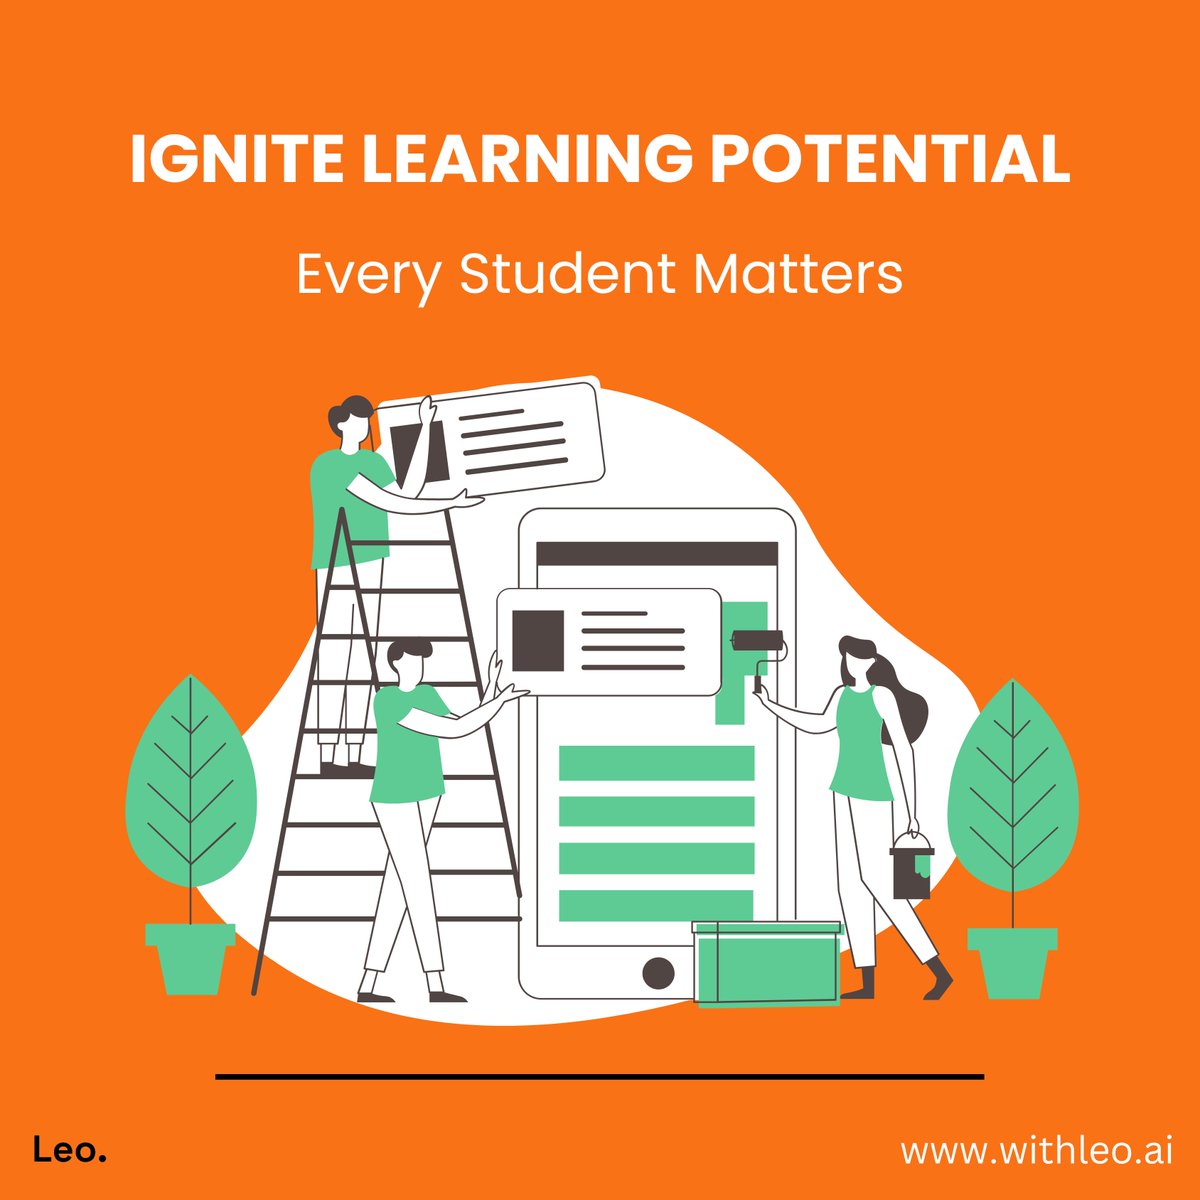 Leo provides tailored support for learners with customizable #AI tools, fostering inclusive and engaging #education for all. Explore withleo.ai to join the mission for an accessible learning environment. #edtech #teaching #AIinEducation #TeacherTools #EducationalAI